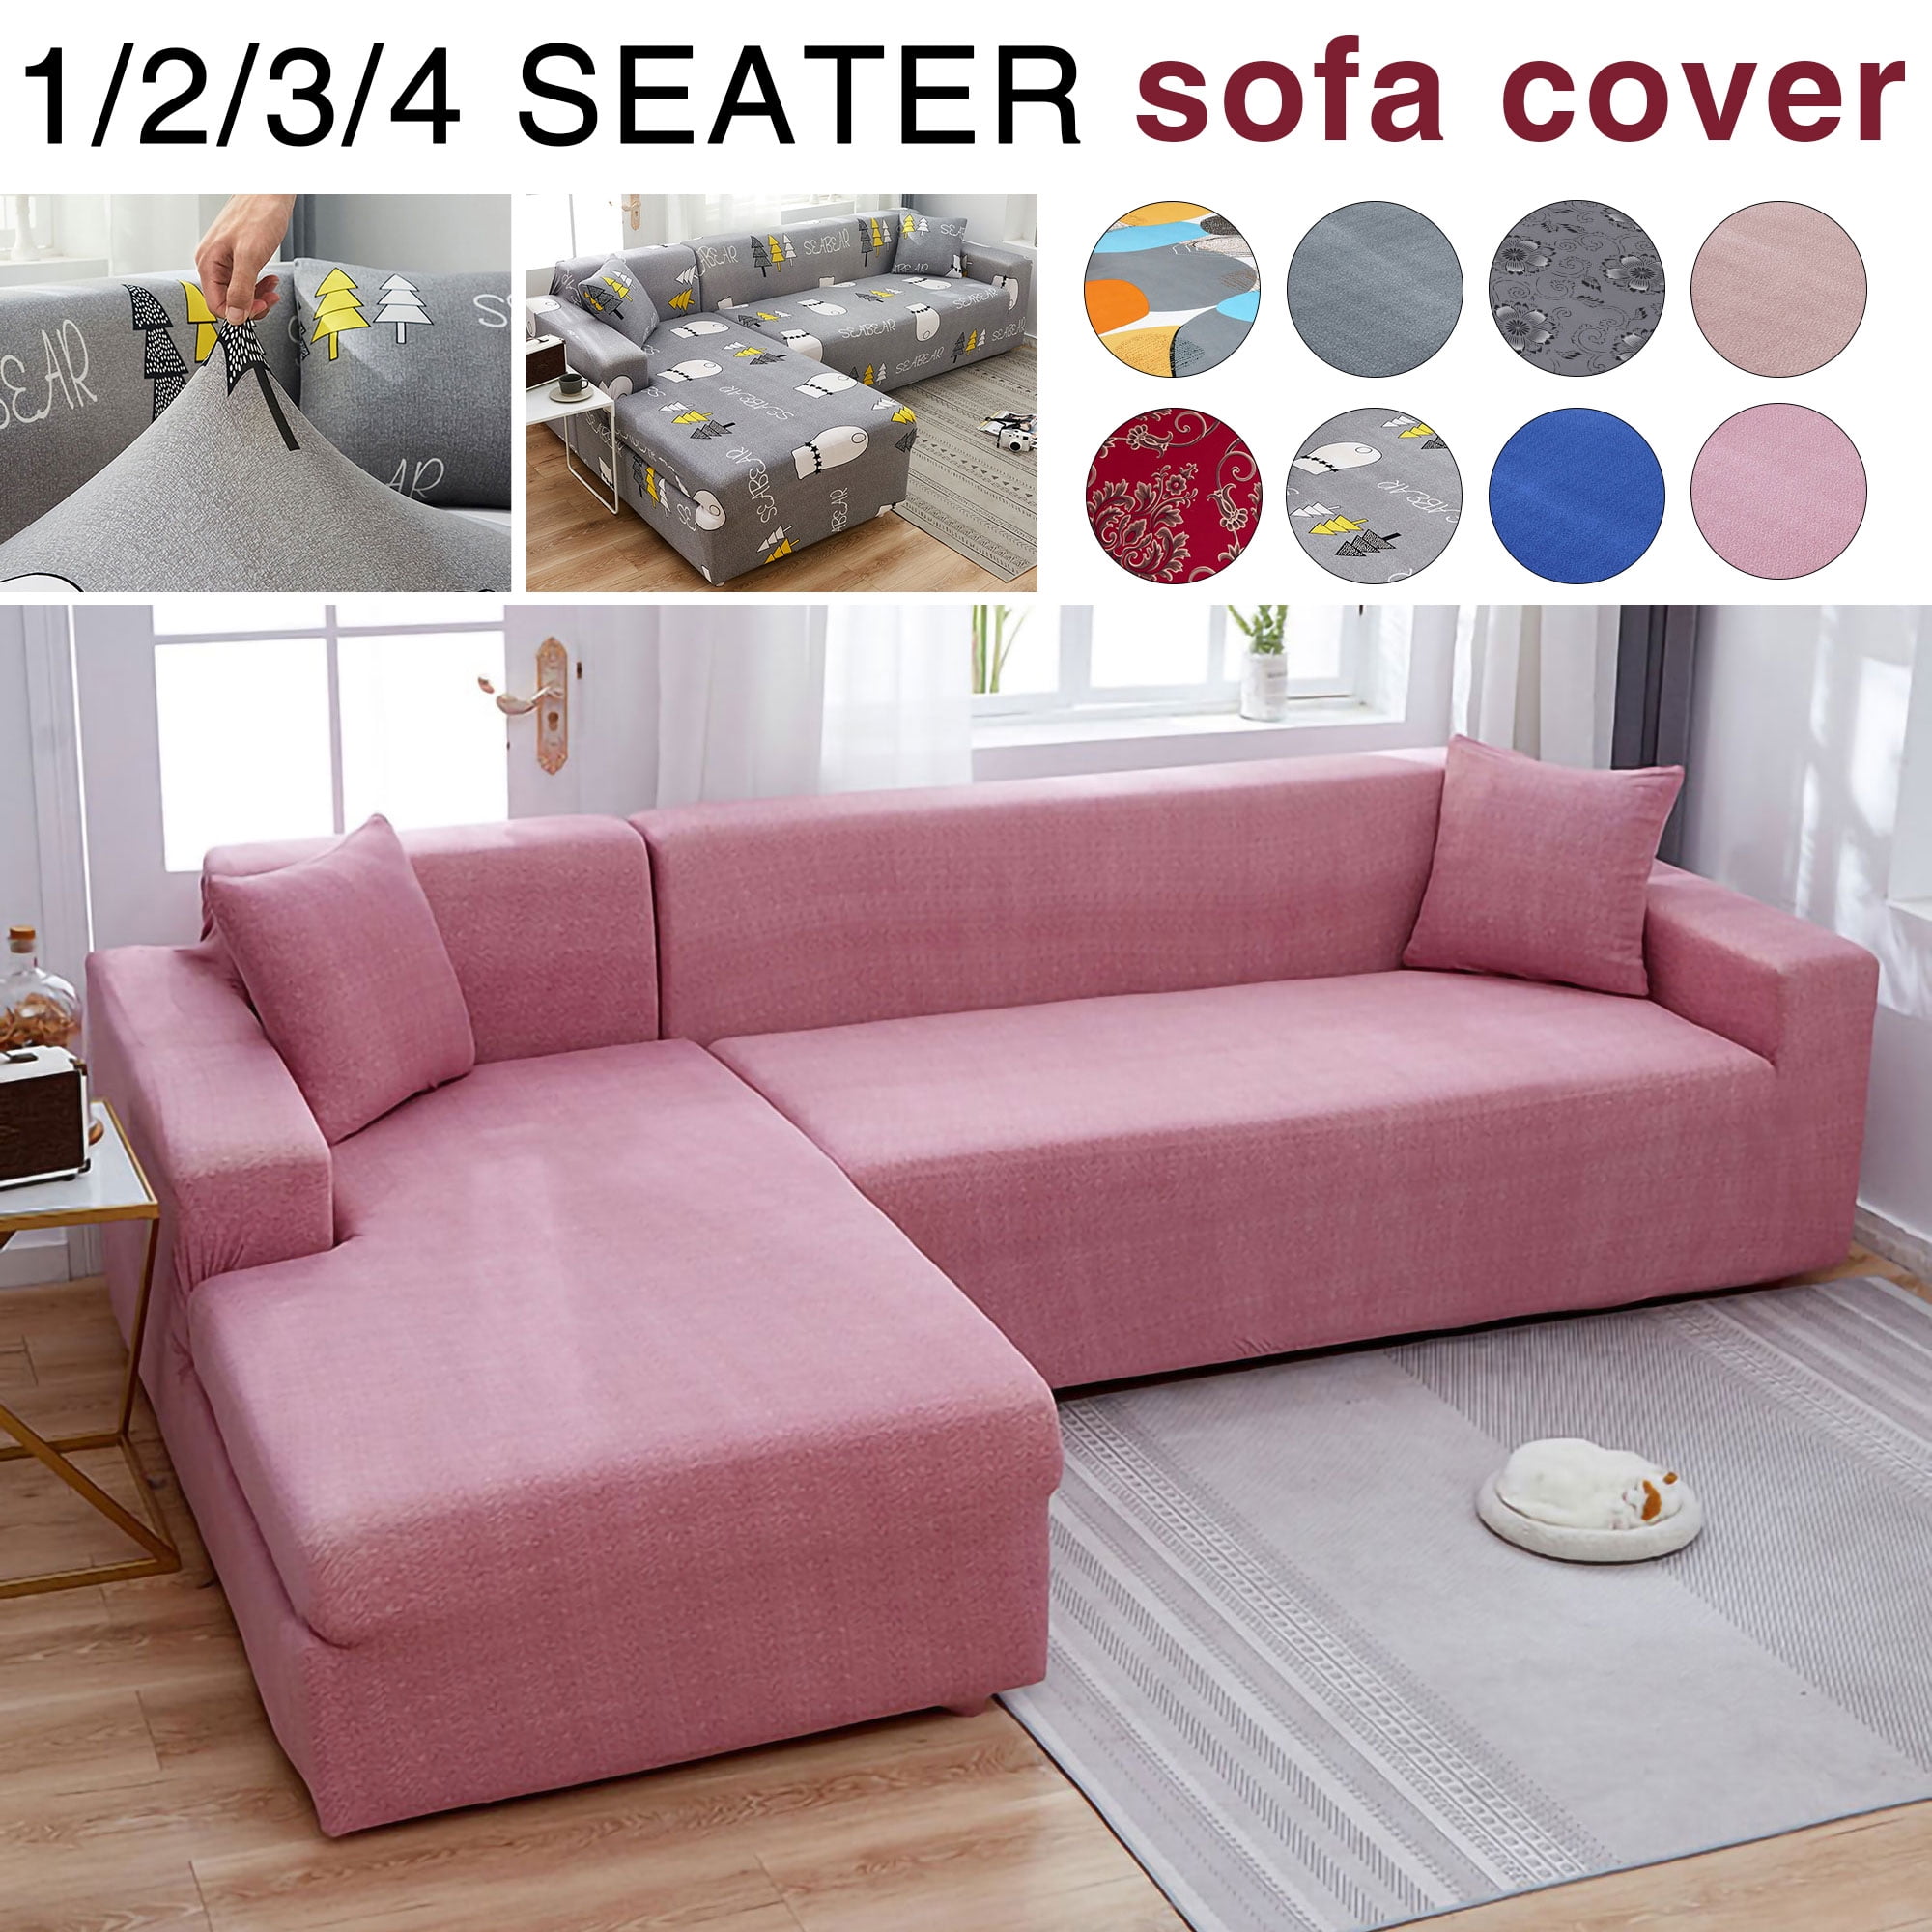 Details about   Stretch Sofa Covers 1/2/3/4 Seater Slipcover Elastic Velvet Settee Couch Protect 